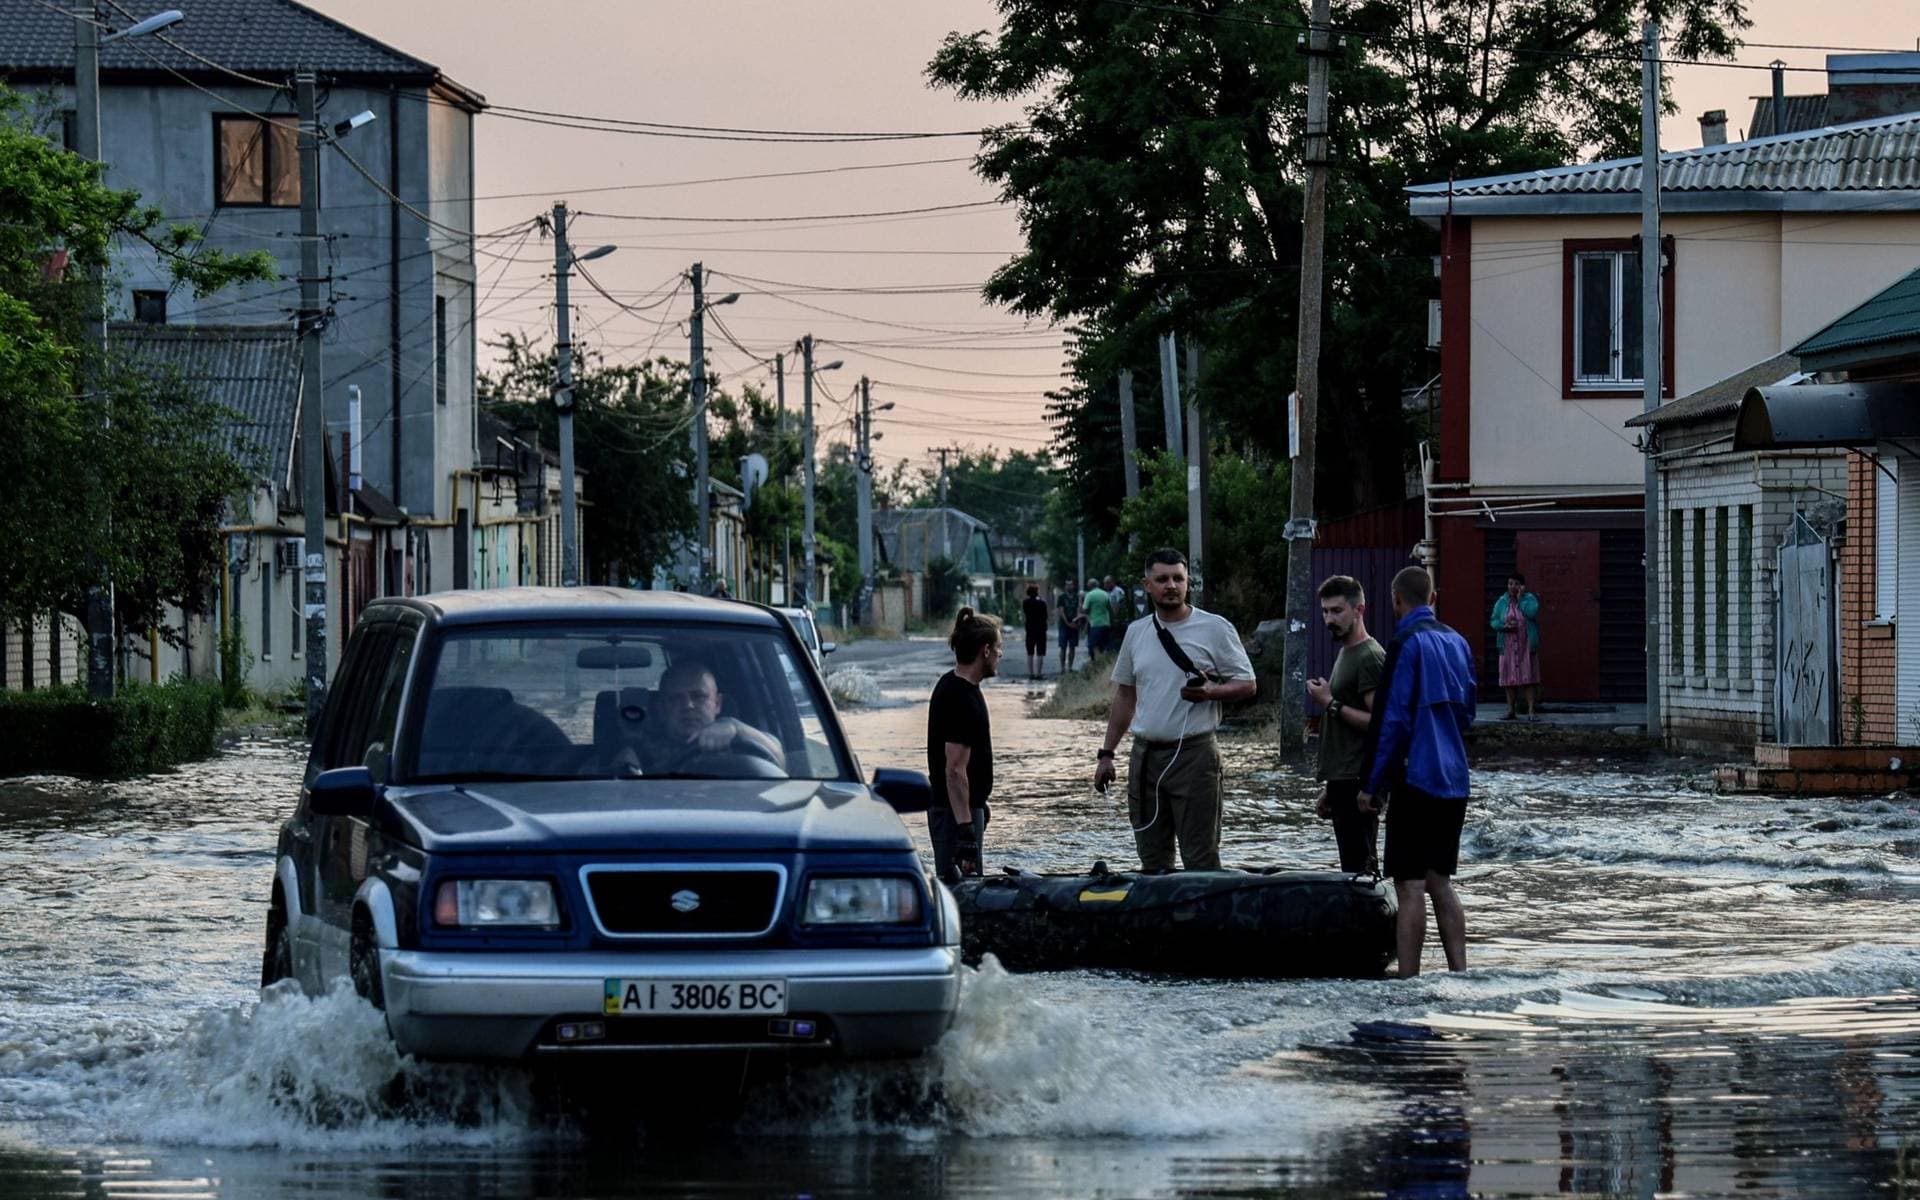 A car makes its way past people standing next to an inflatable boat, in a flooded street of Kherson